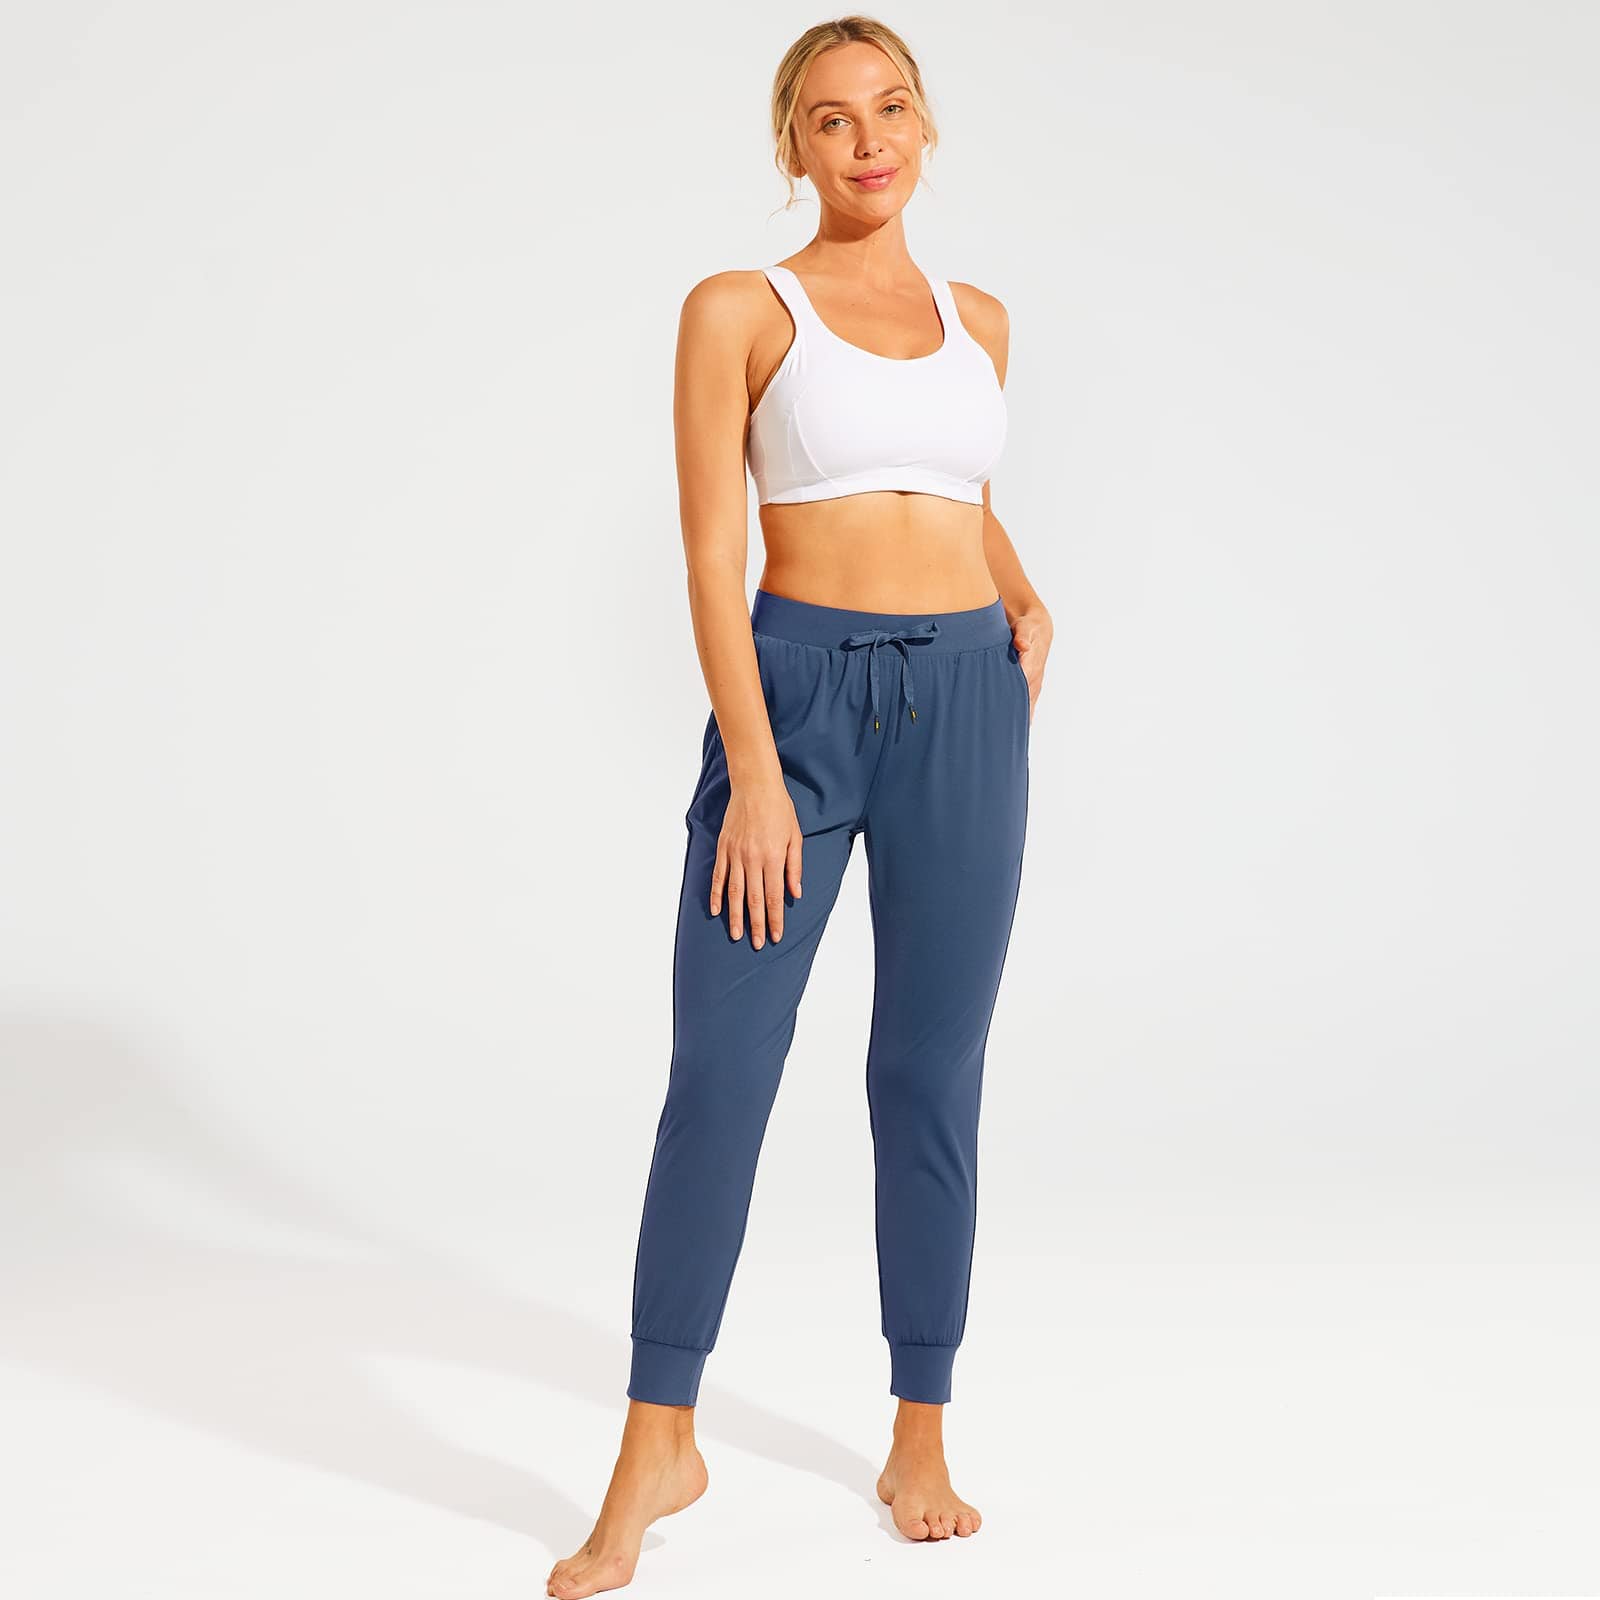 The Most Popular Lightweight Athletic Women's Jogger Pants and